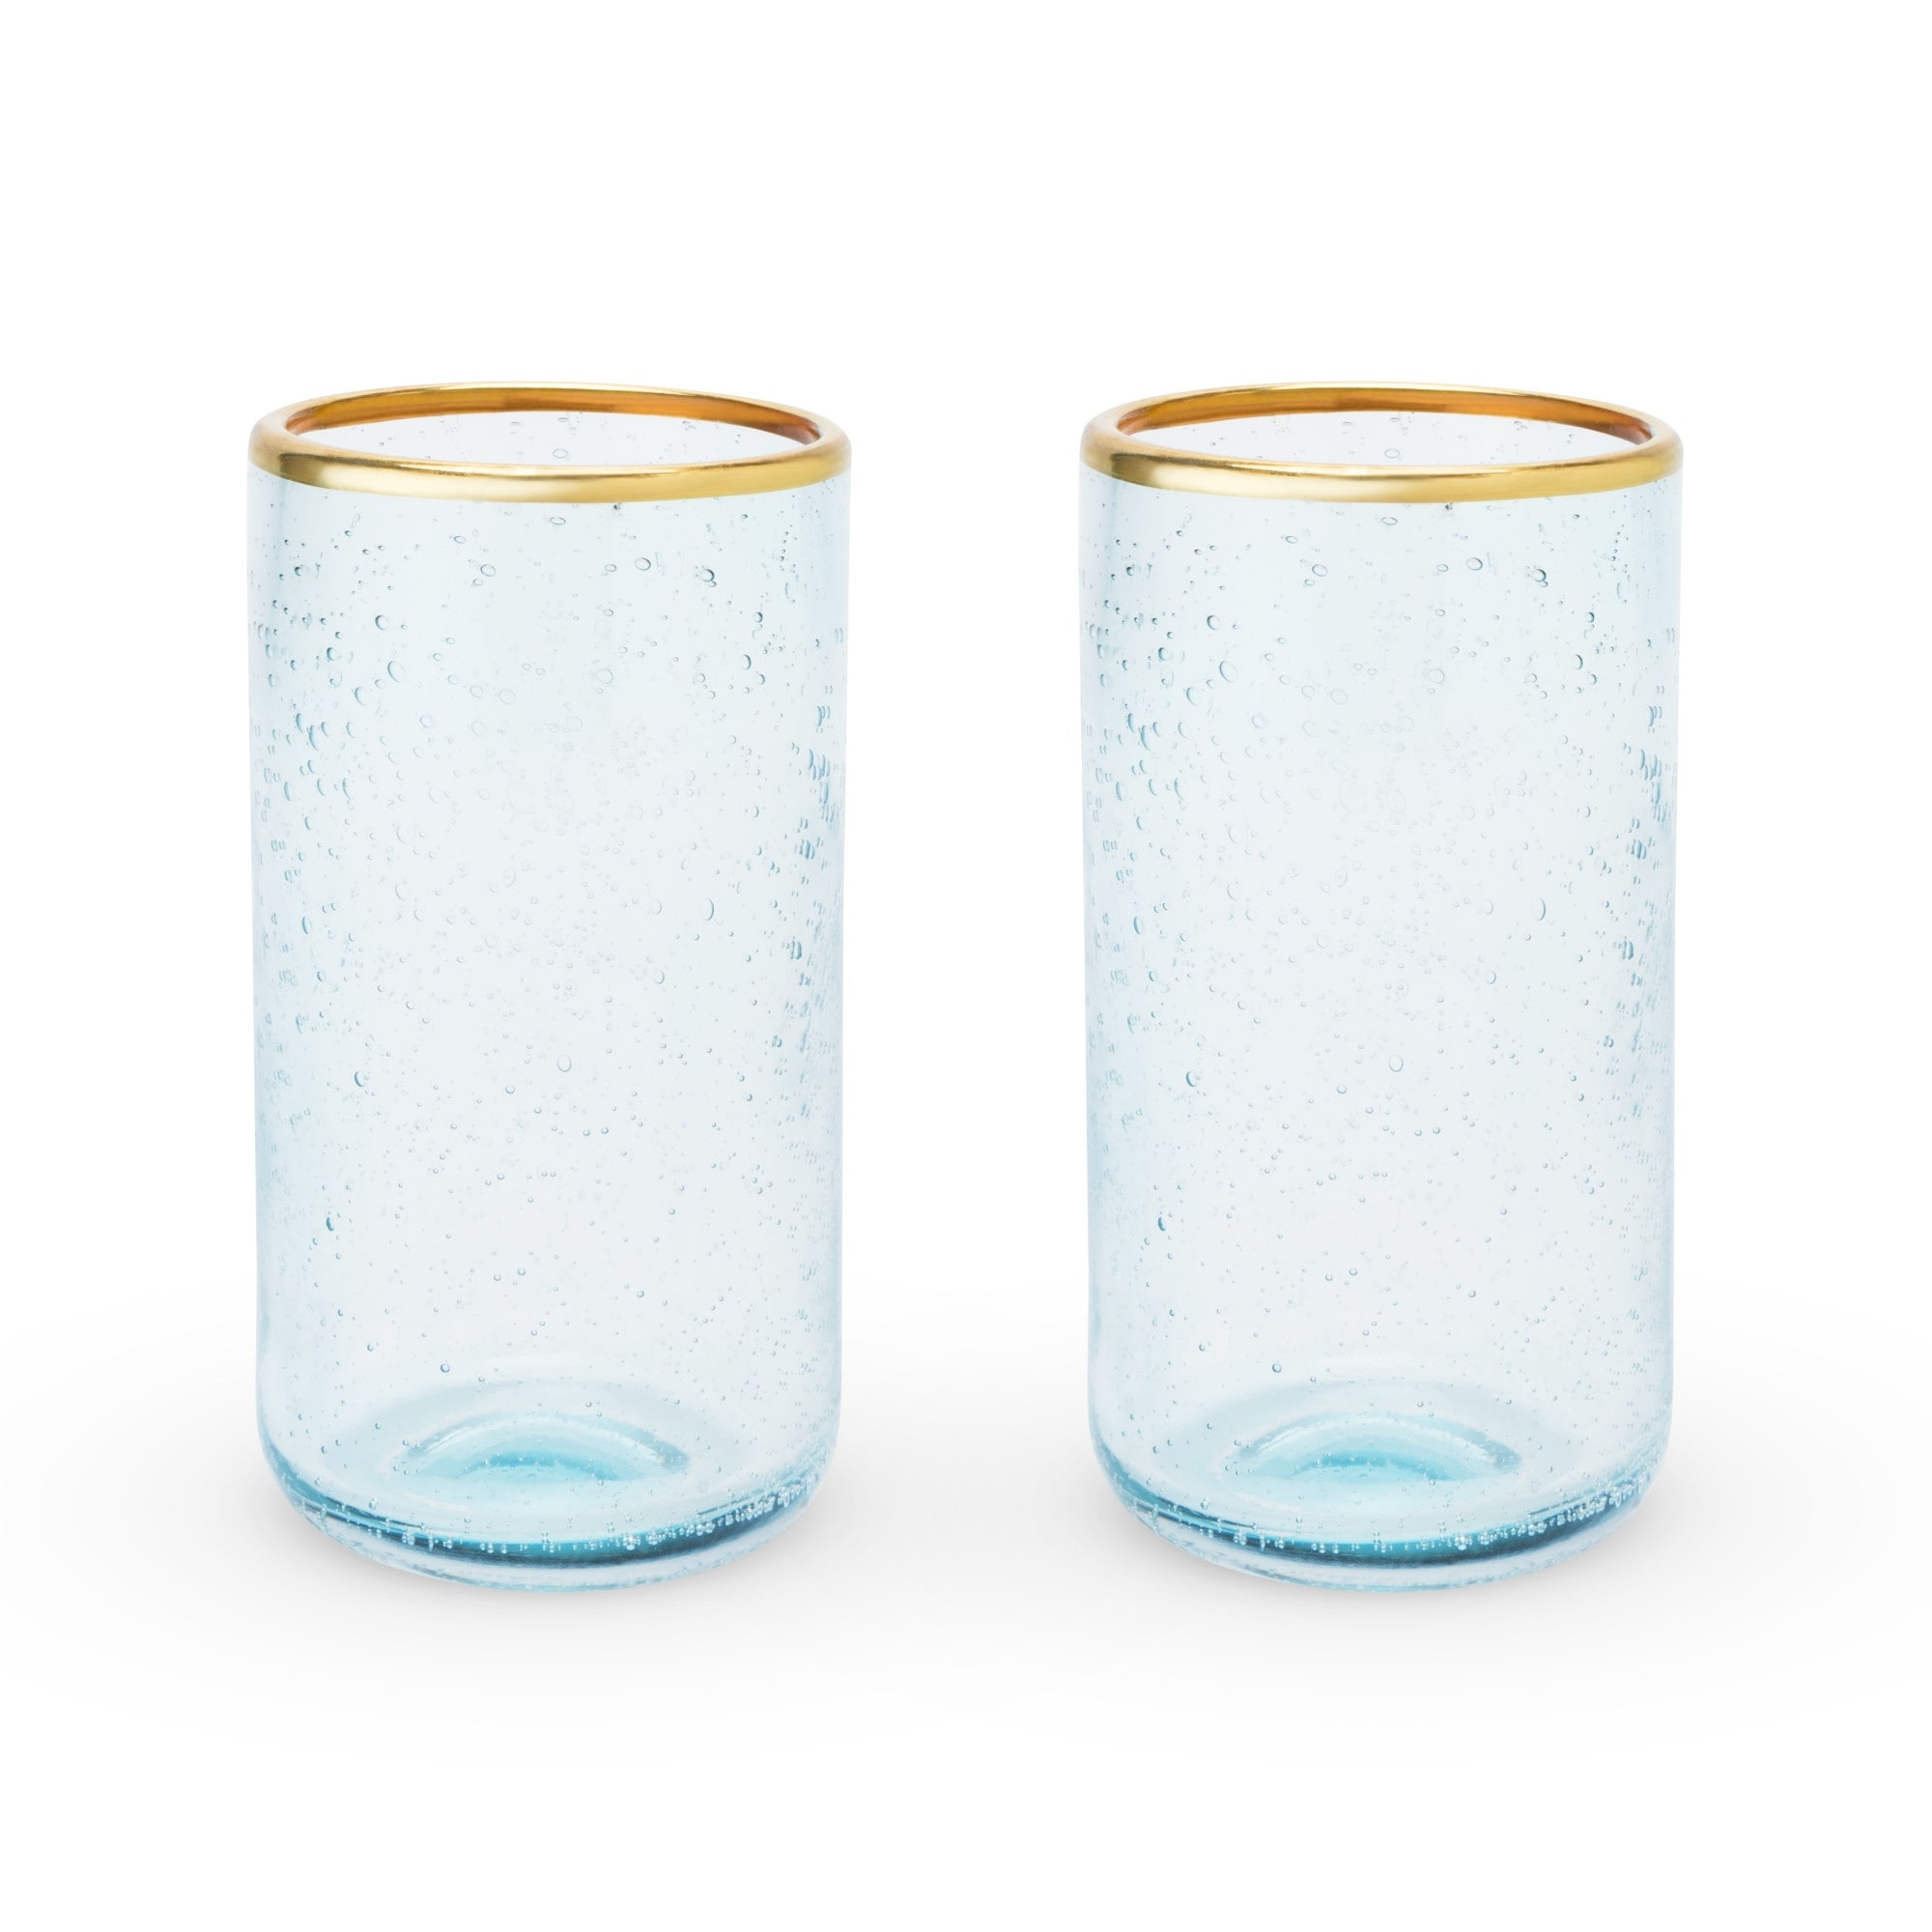 https://ak1.ostkcdn.com/images/products/is/images/direct/caa114b420a67a989bf78a69f9bc851c548cb04d/Aqua-Bubble-Glass-Tumbler-Set-by-Twine.jpg